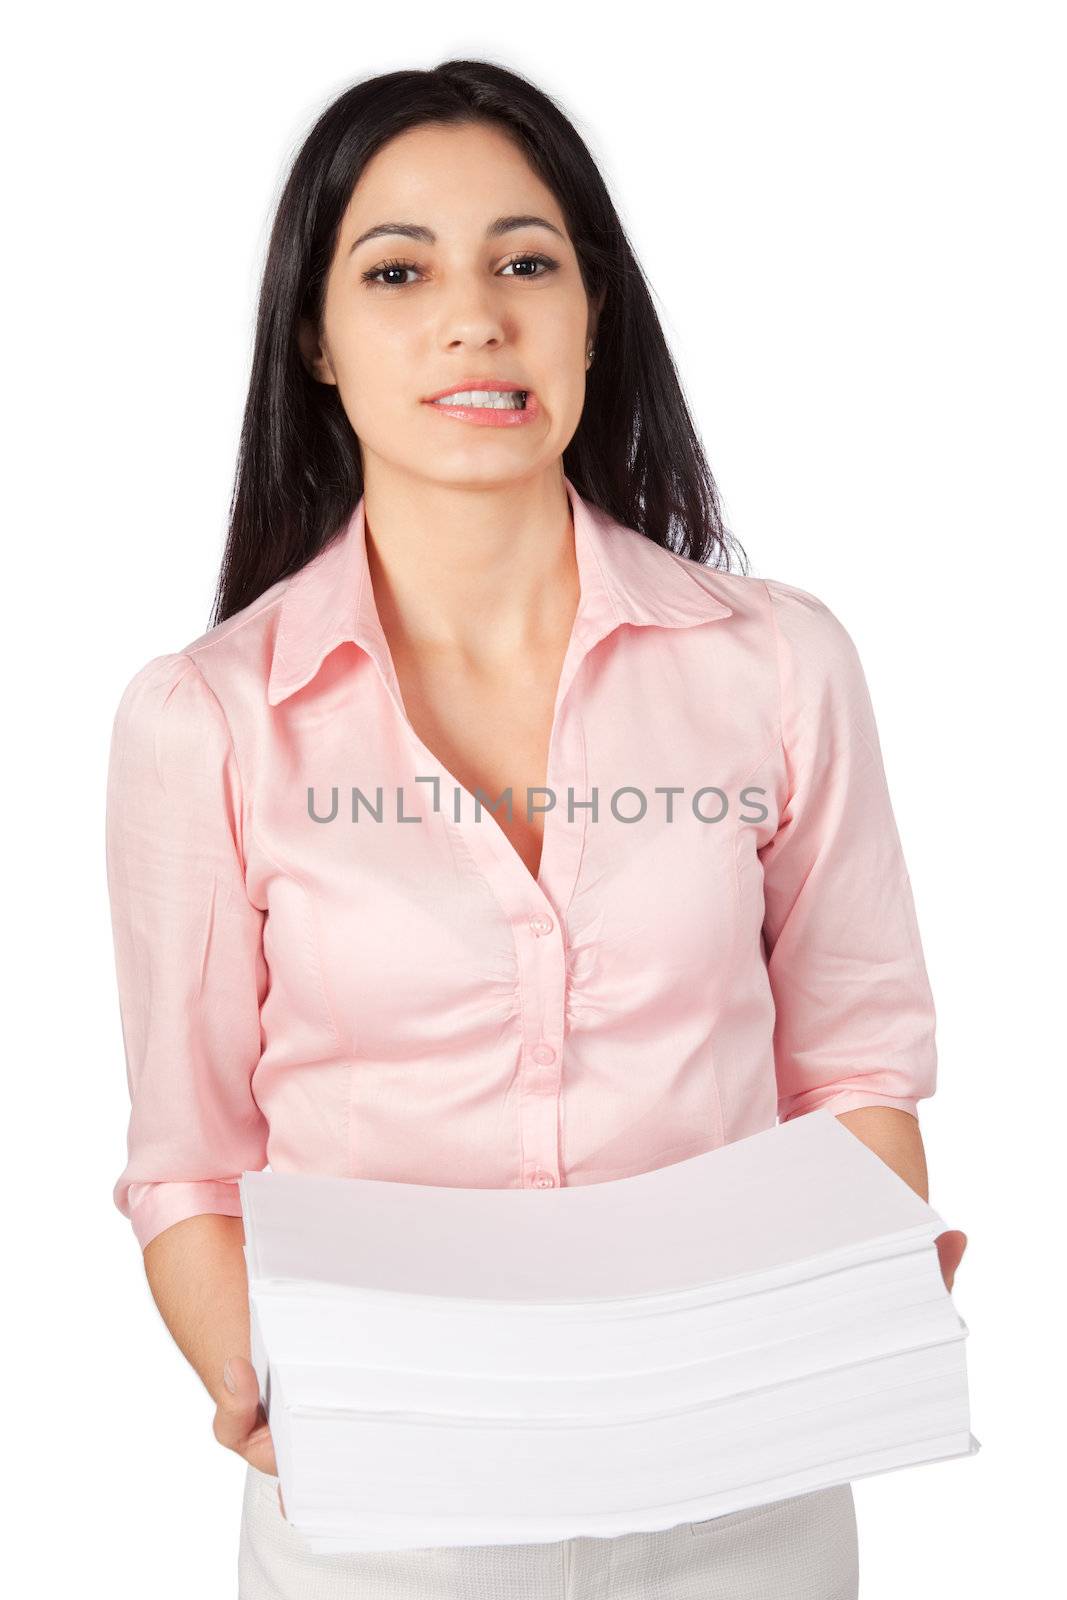 Woman holding a big pile of paper work isolated on white background.